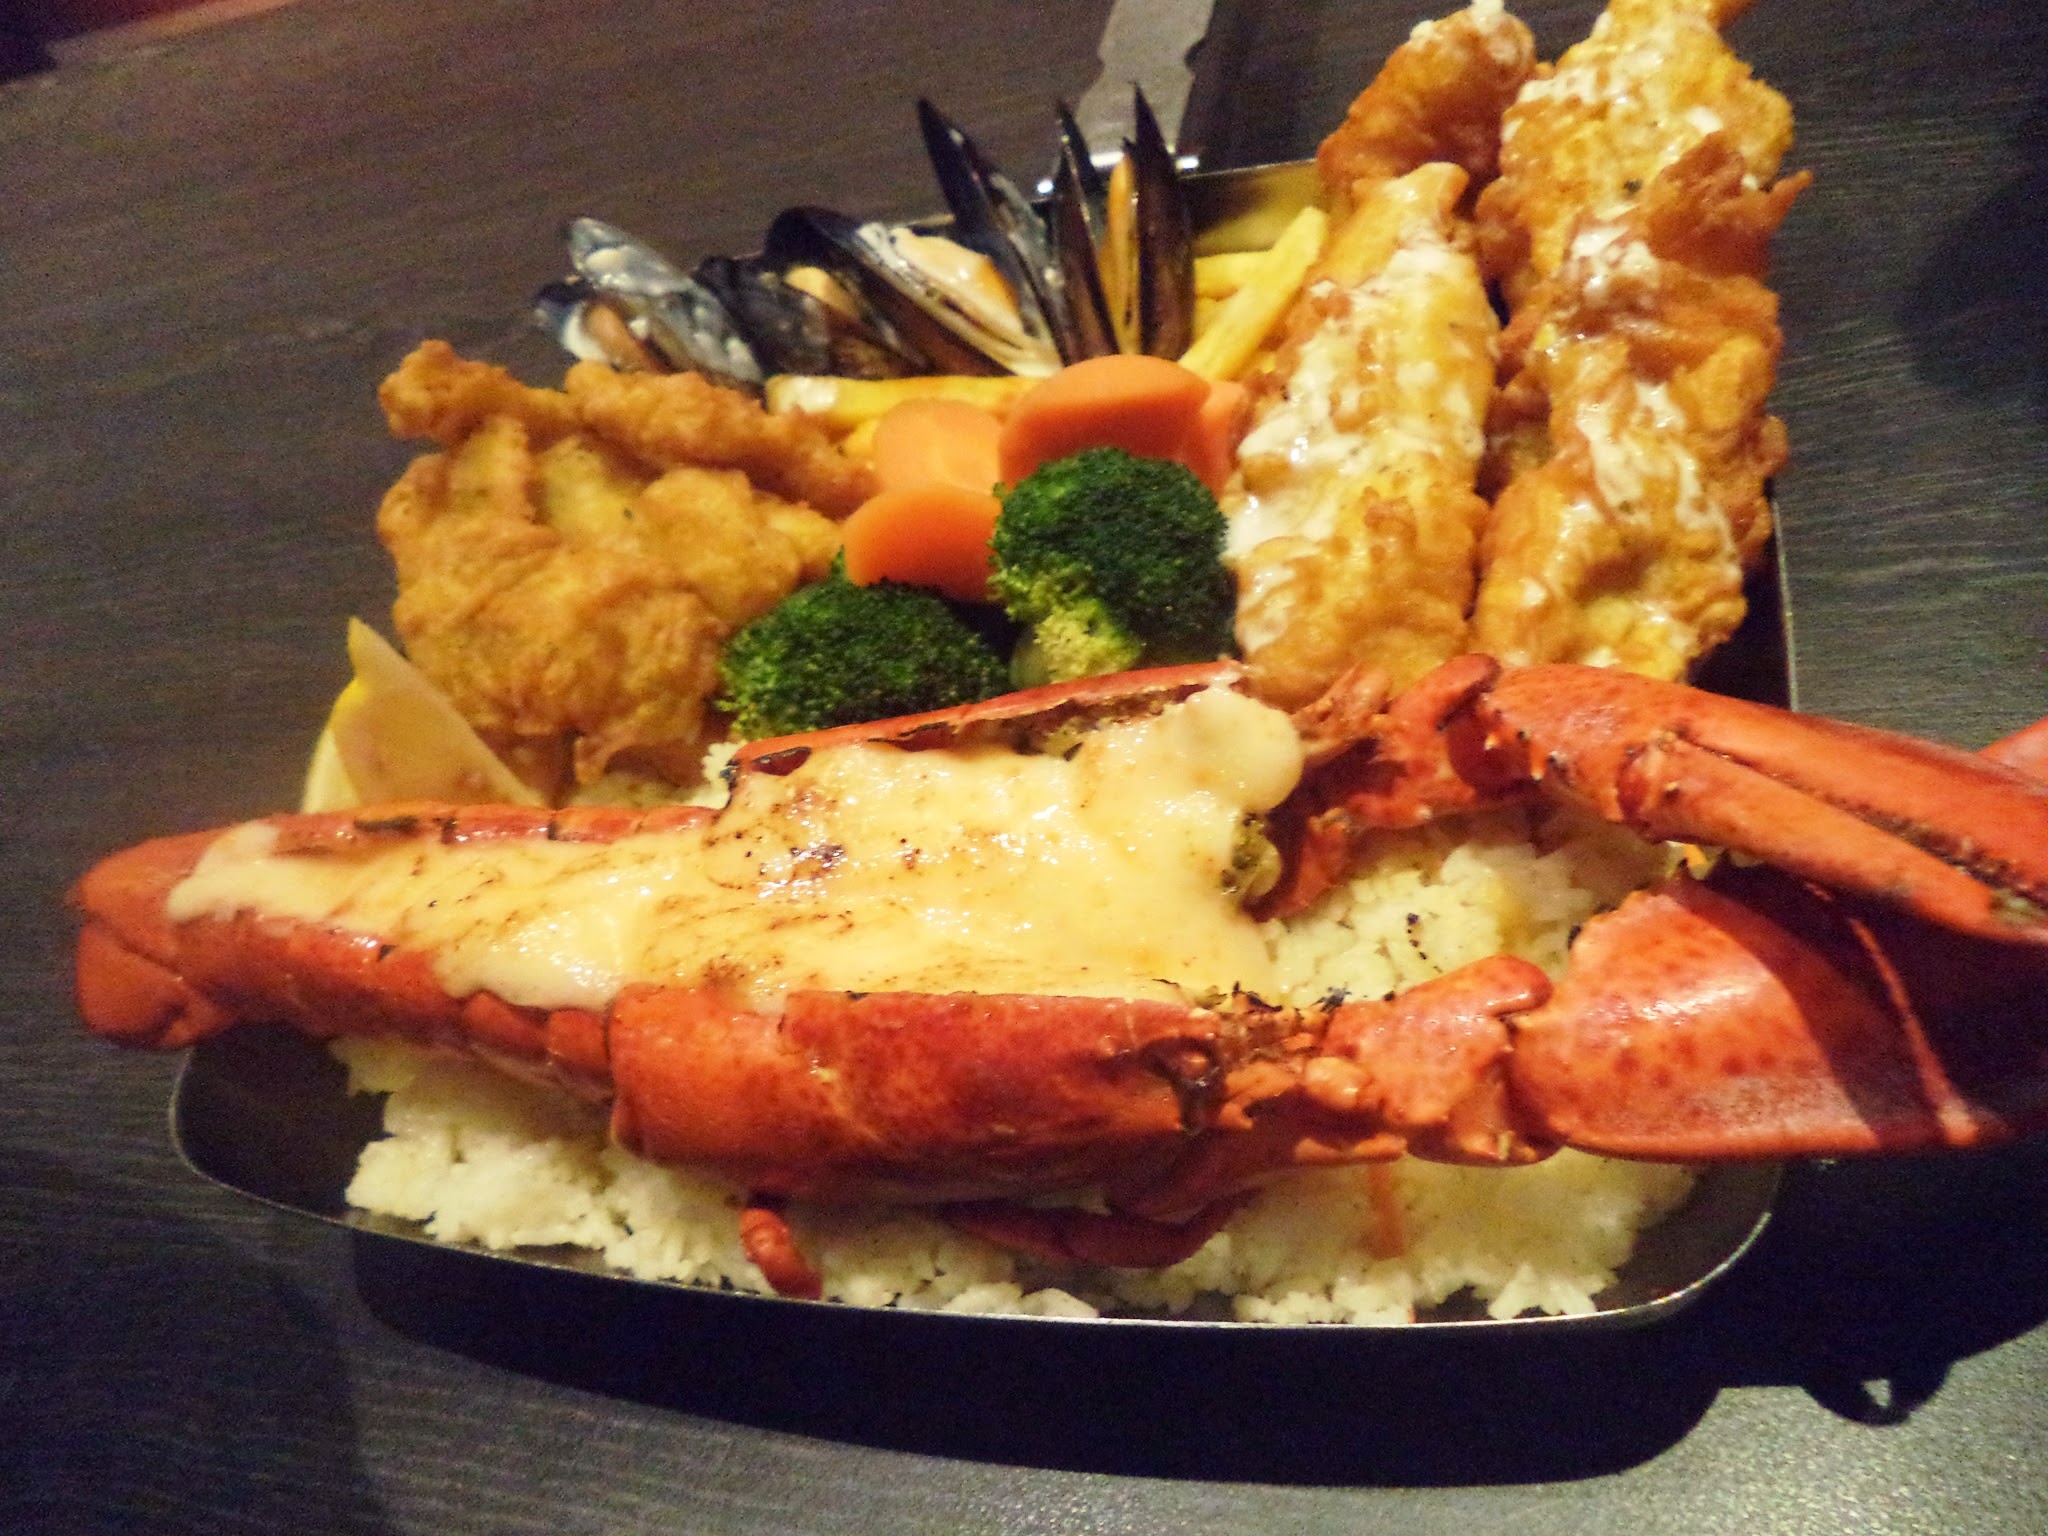 food review, Manhattan FISH MARKET, Nu Sentral, Malaysia, Lobster murah, cheap lobster in town, Canadian Lobster, manhattan fish market lobster menu,